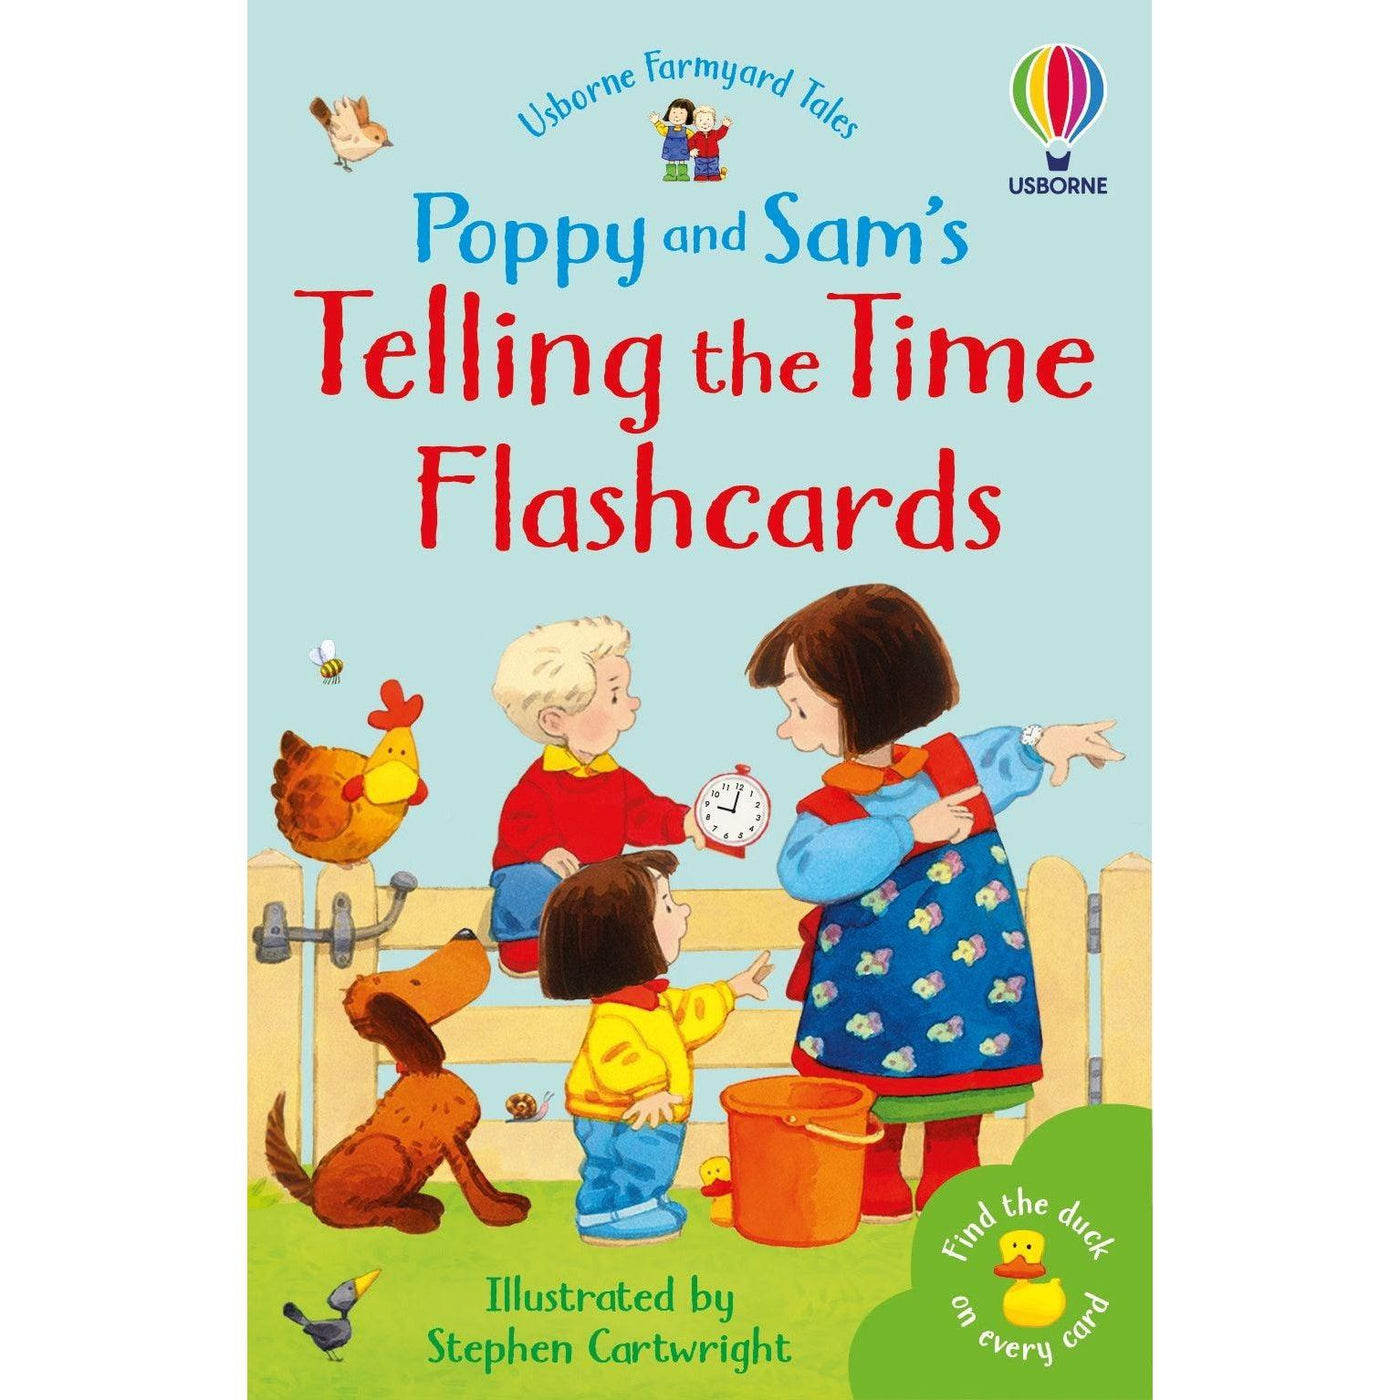 Poppy And Sam's Telling The Time Flashcards (Farmyard Tales Poppy And Sam): 1